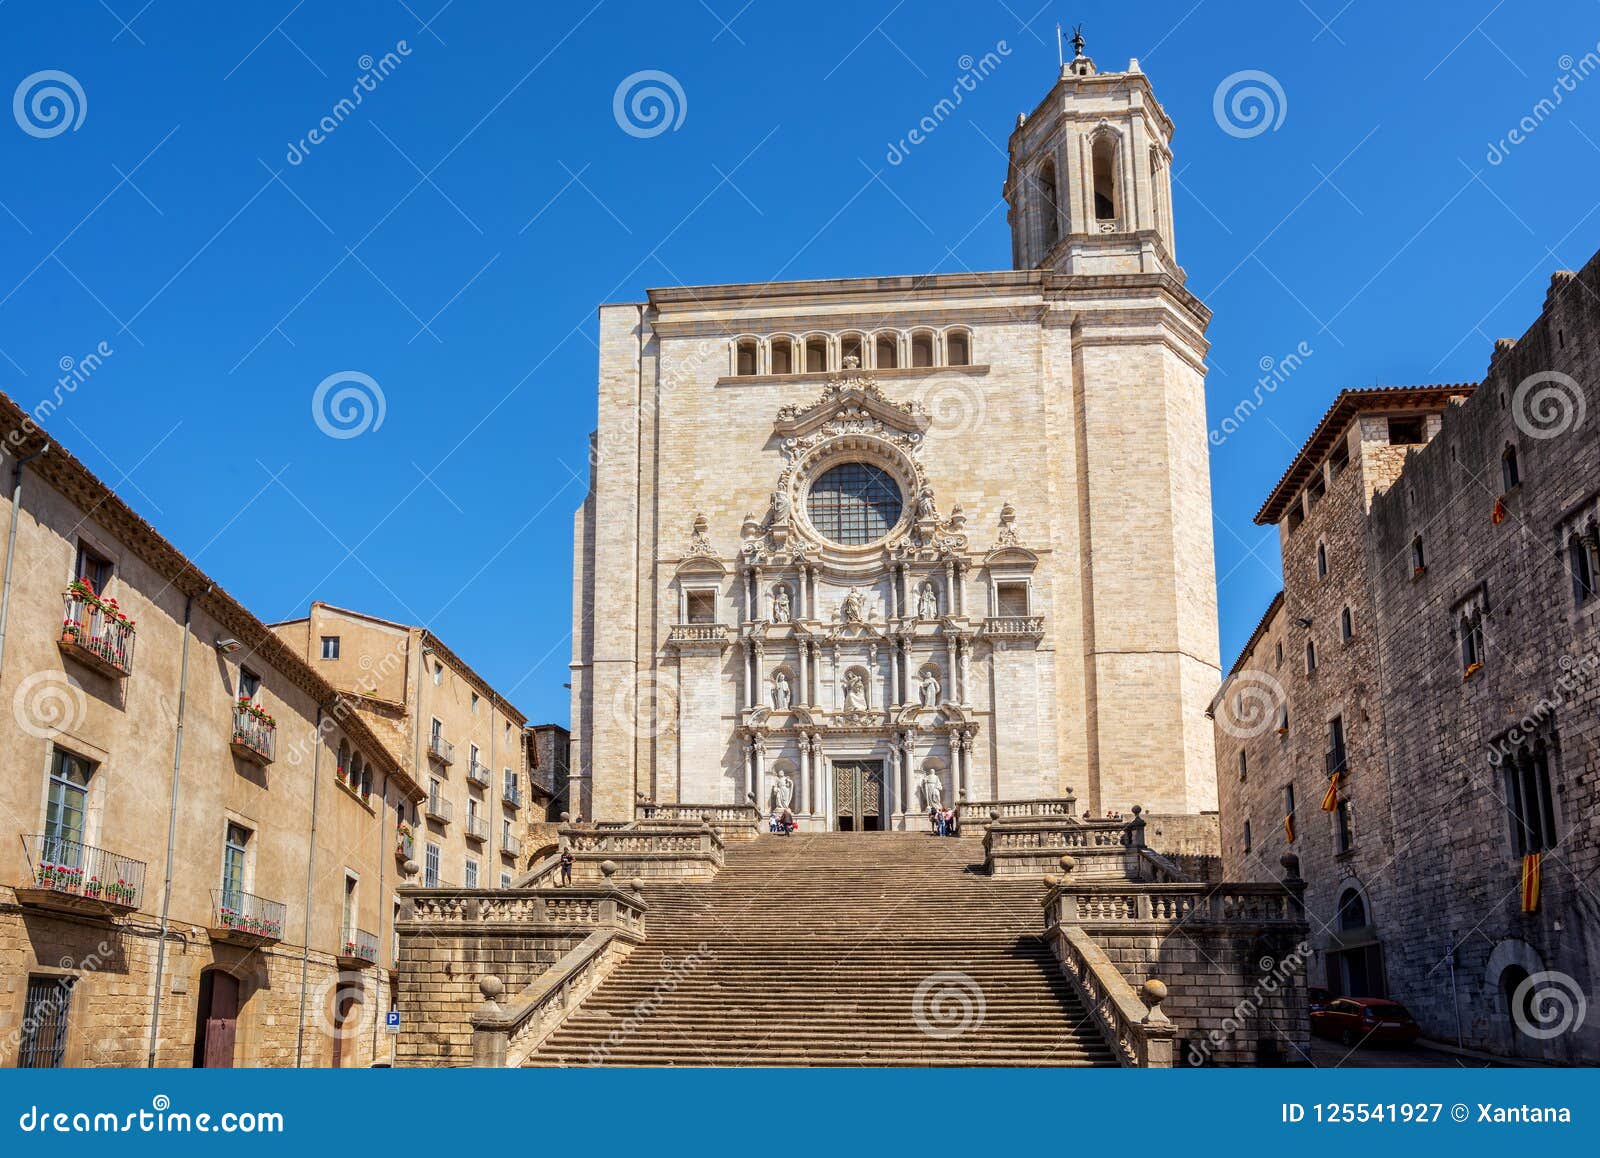 the medieval cathedral of saint mary of girona, catalonia, spain